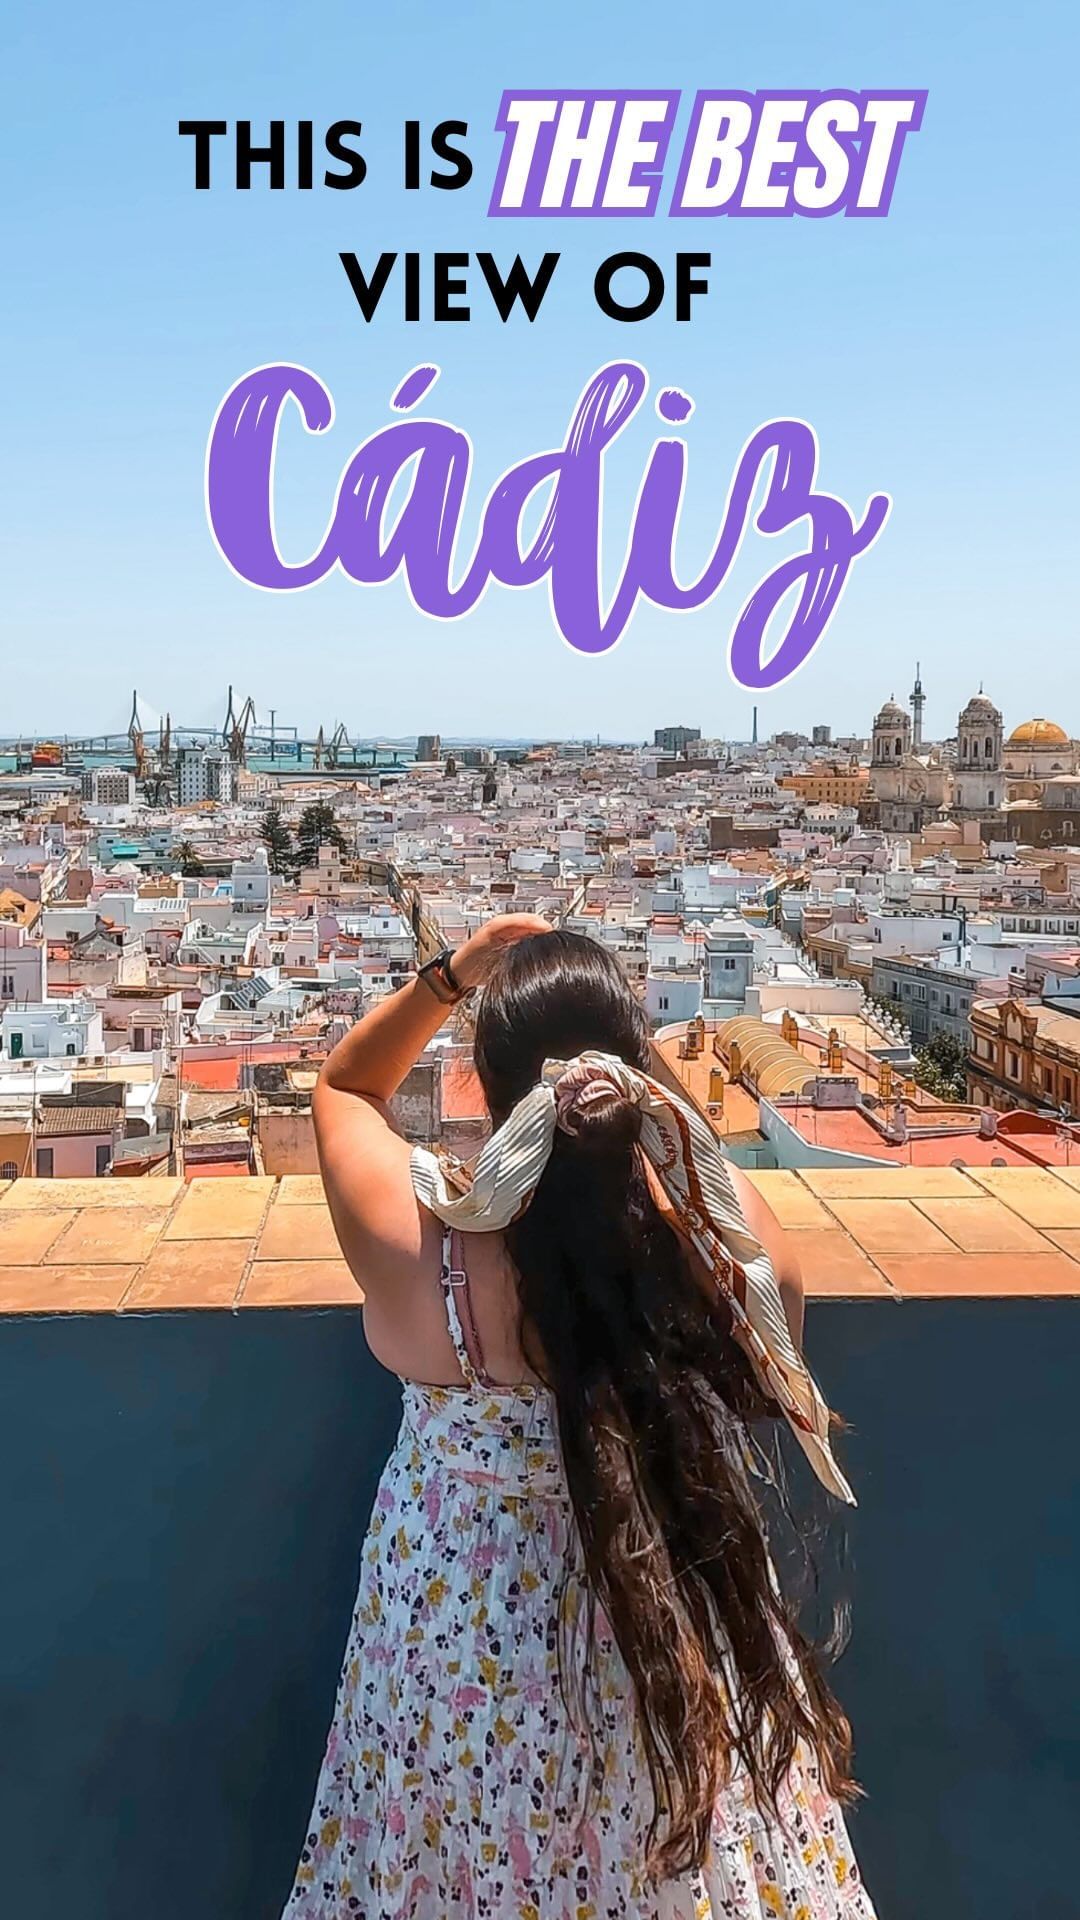 Culinary and Cultural Delights in Cádiz